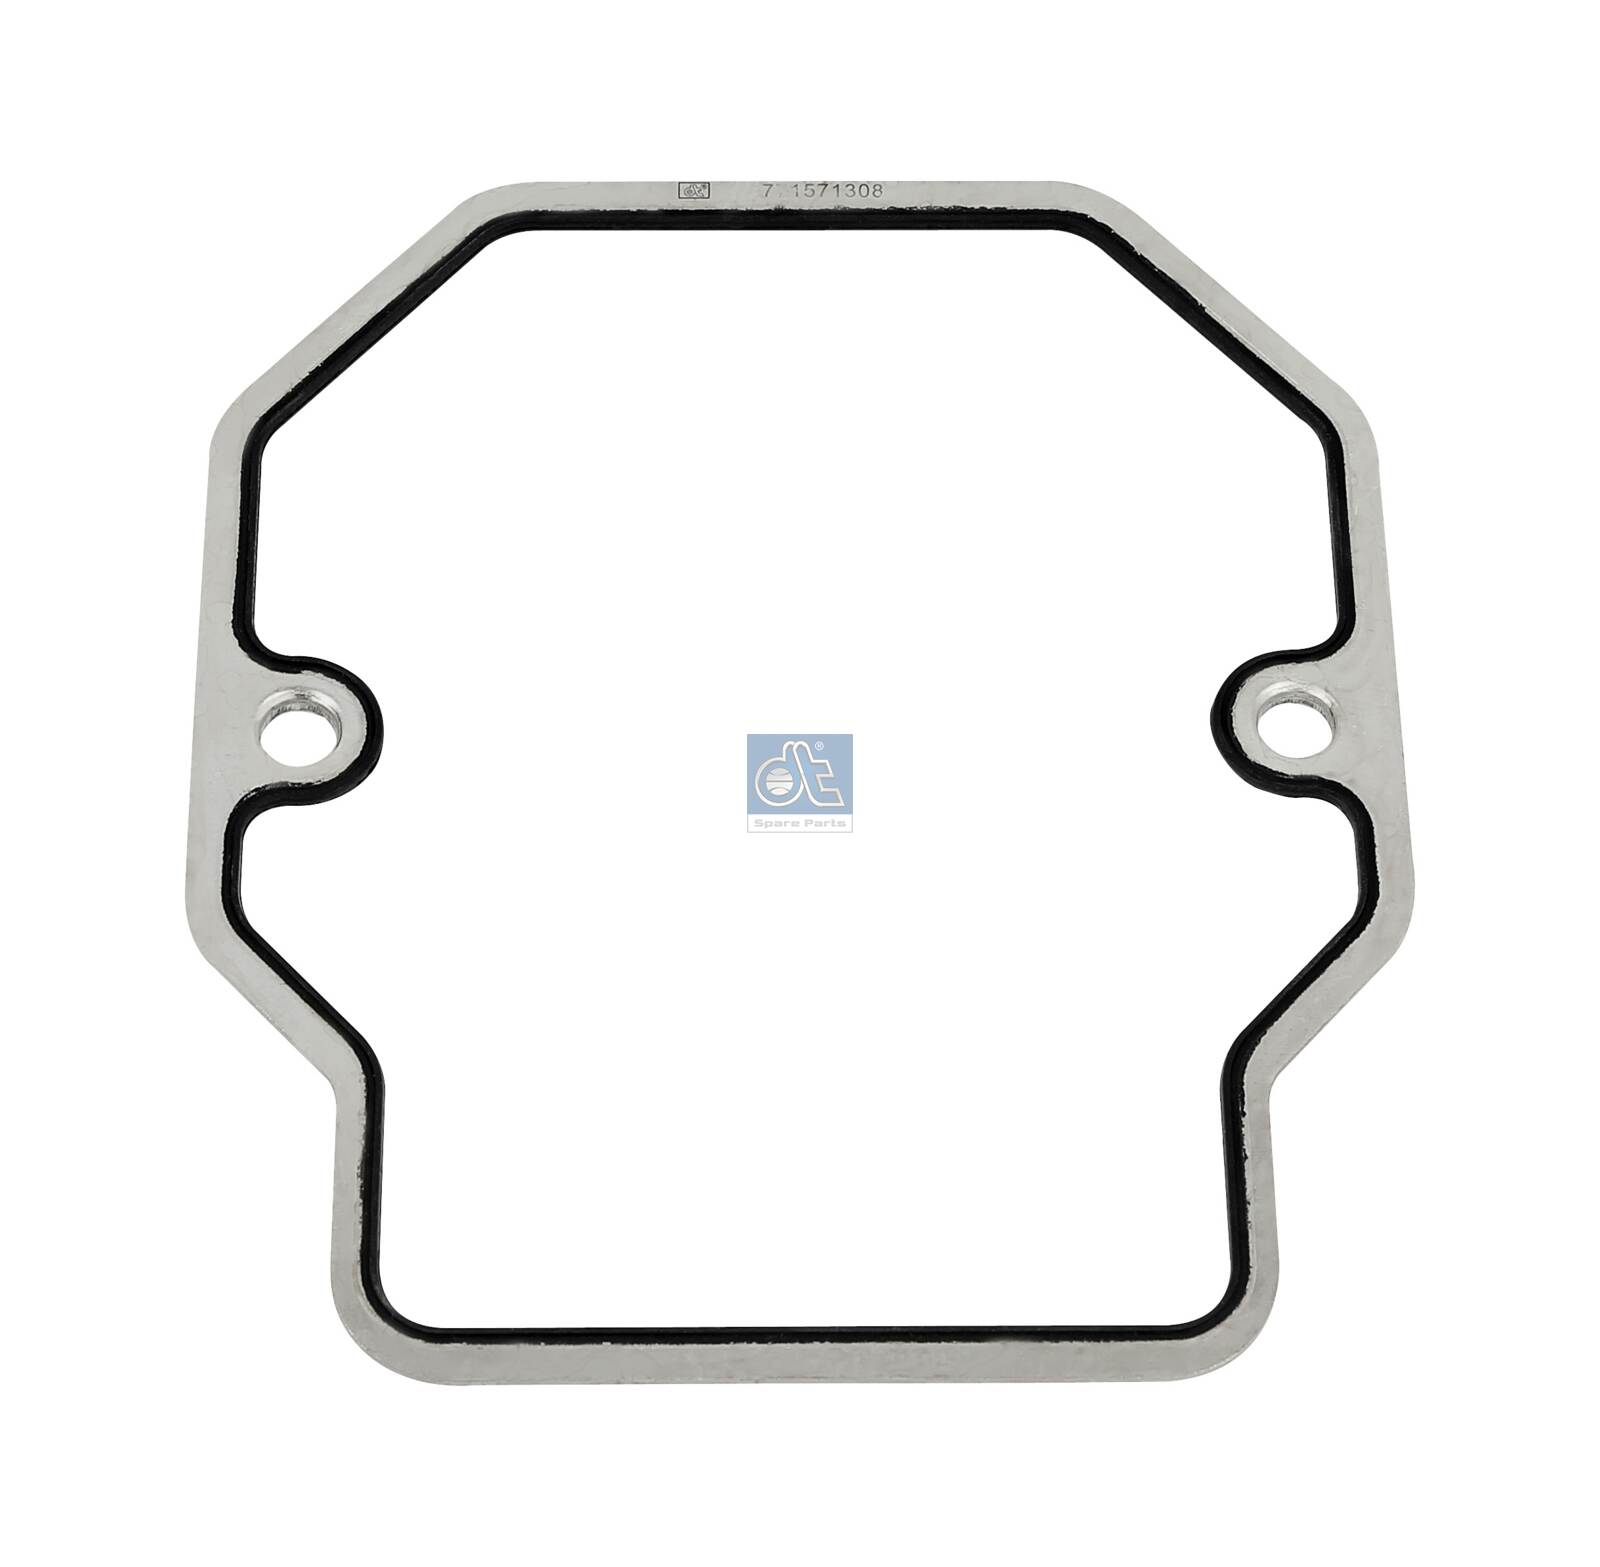 Gasket, cylinder head cover - 3.12112 DT Spare Parts - 51.03905.0157, 01234100, 023.342